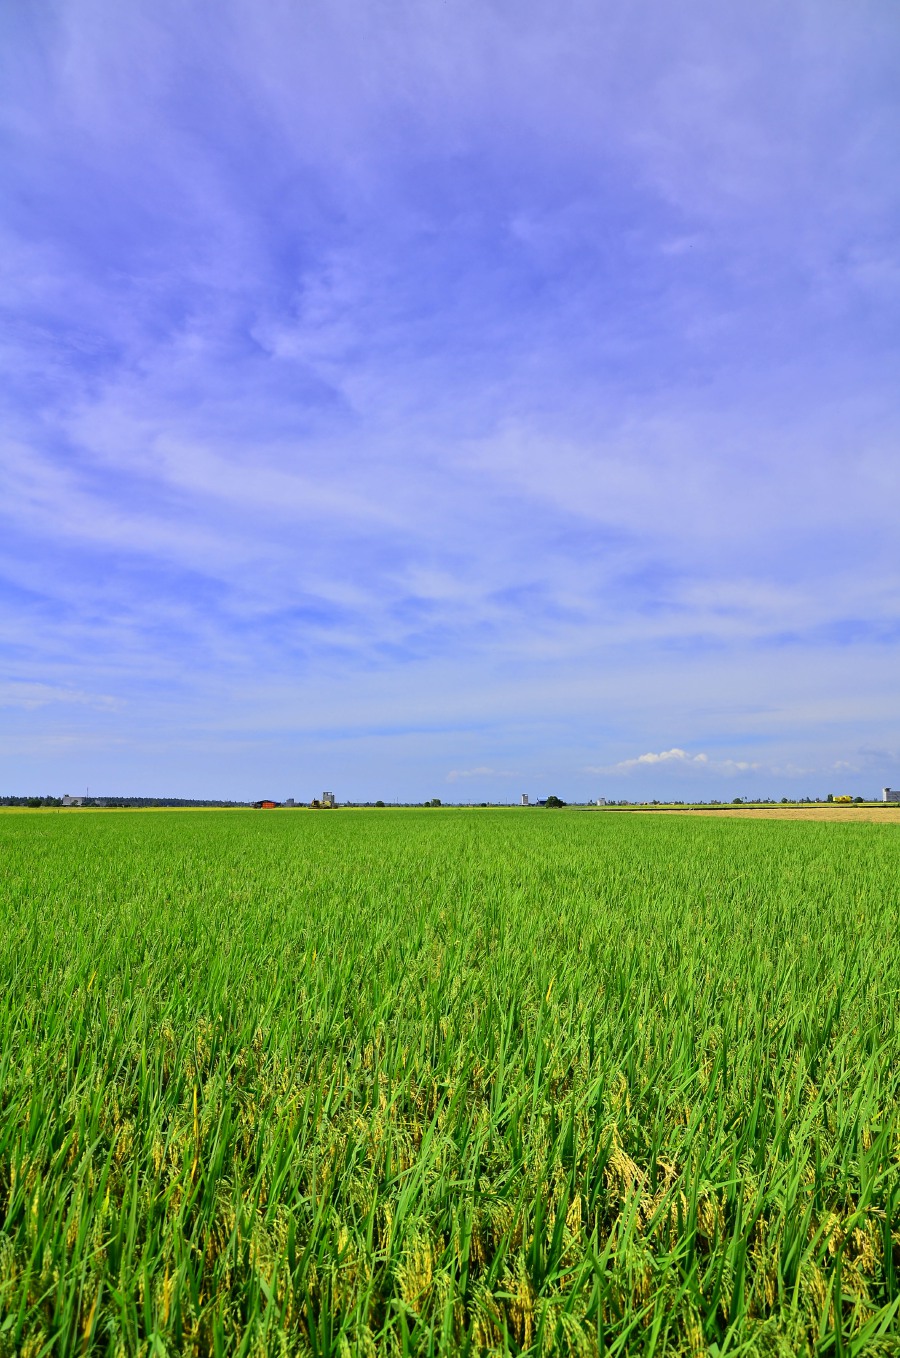 A paddy field — archaeologists believe that rice domestication is one of the most important events in human history. 